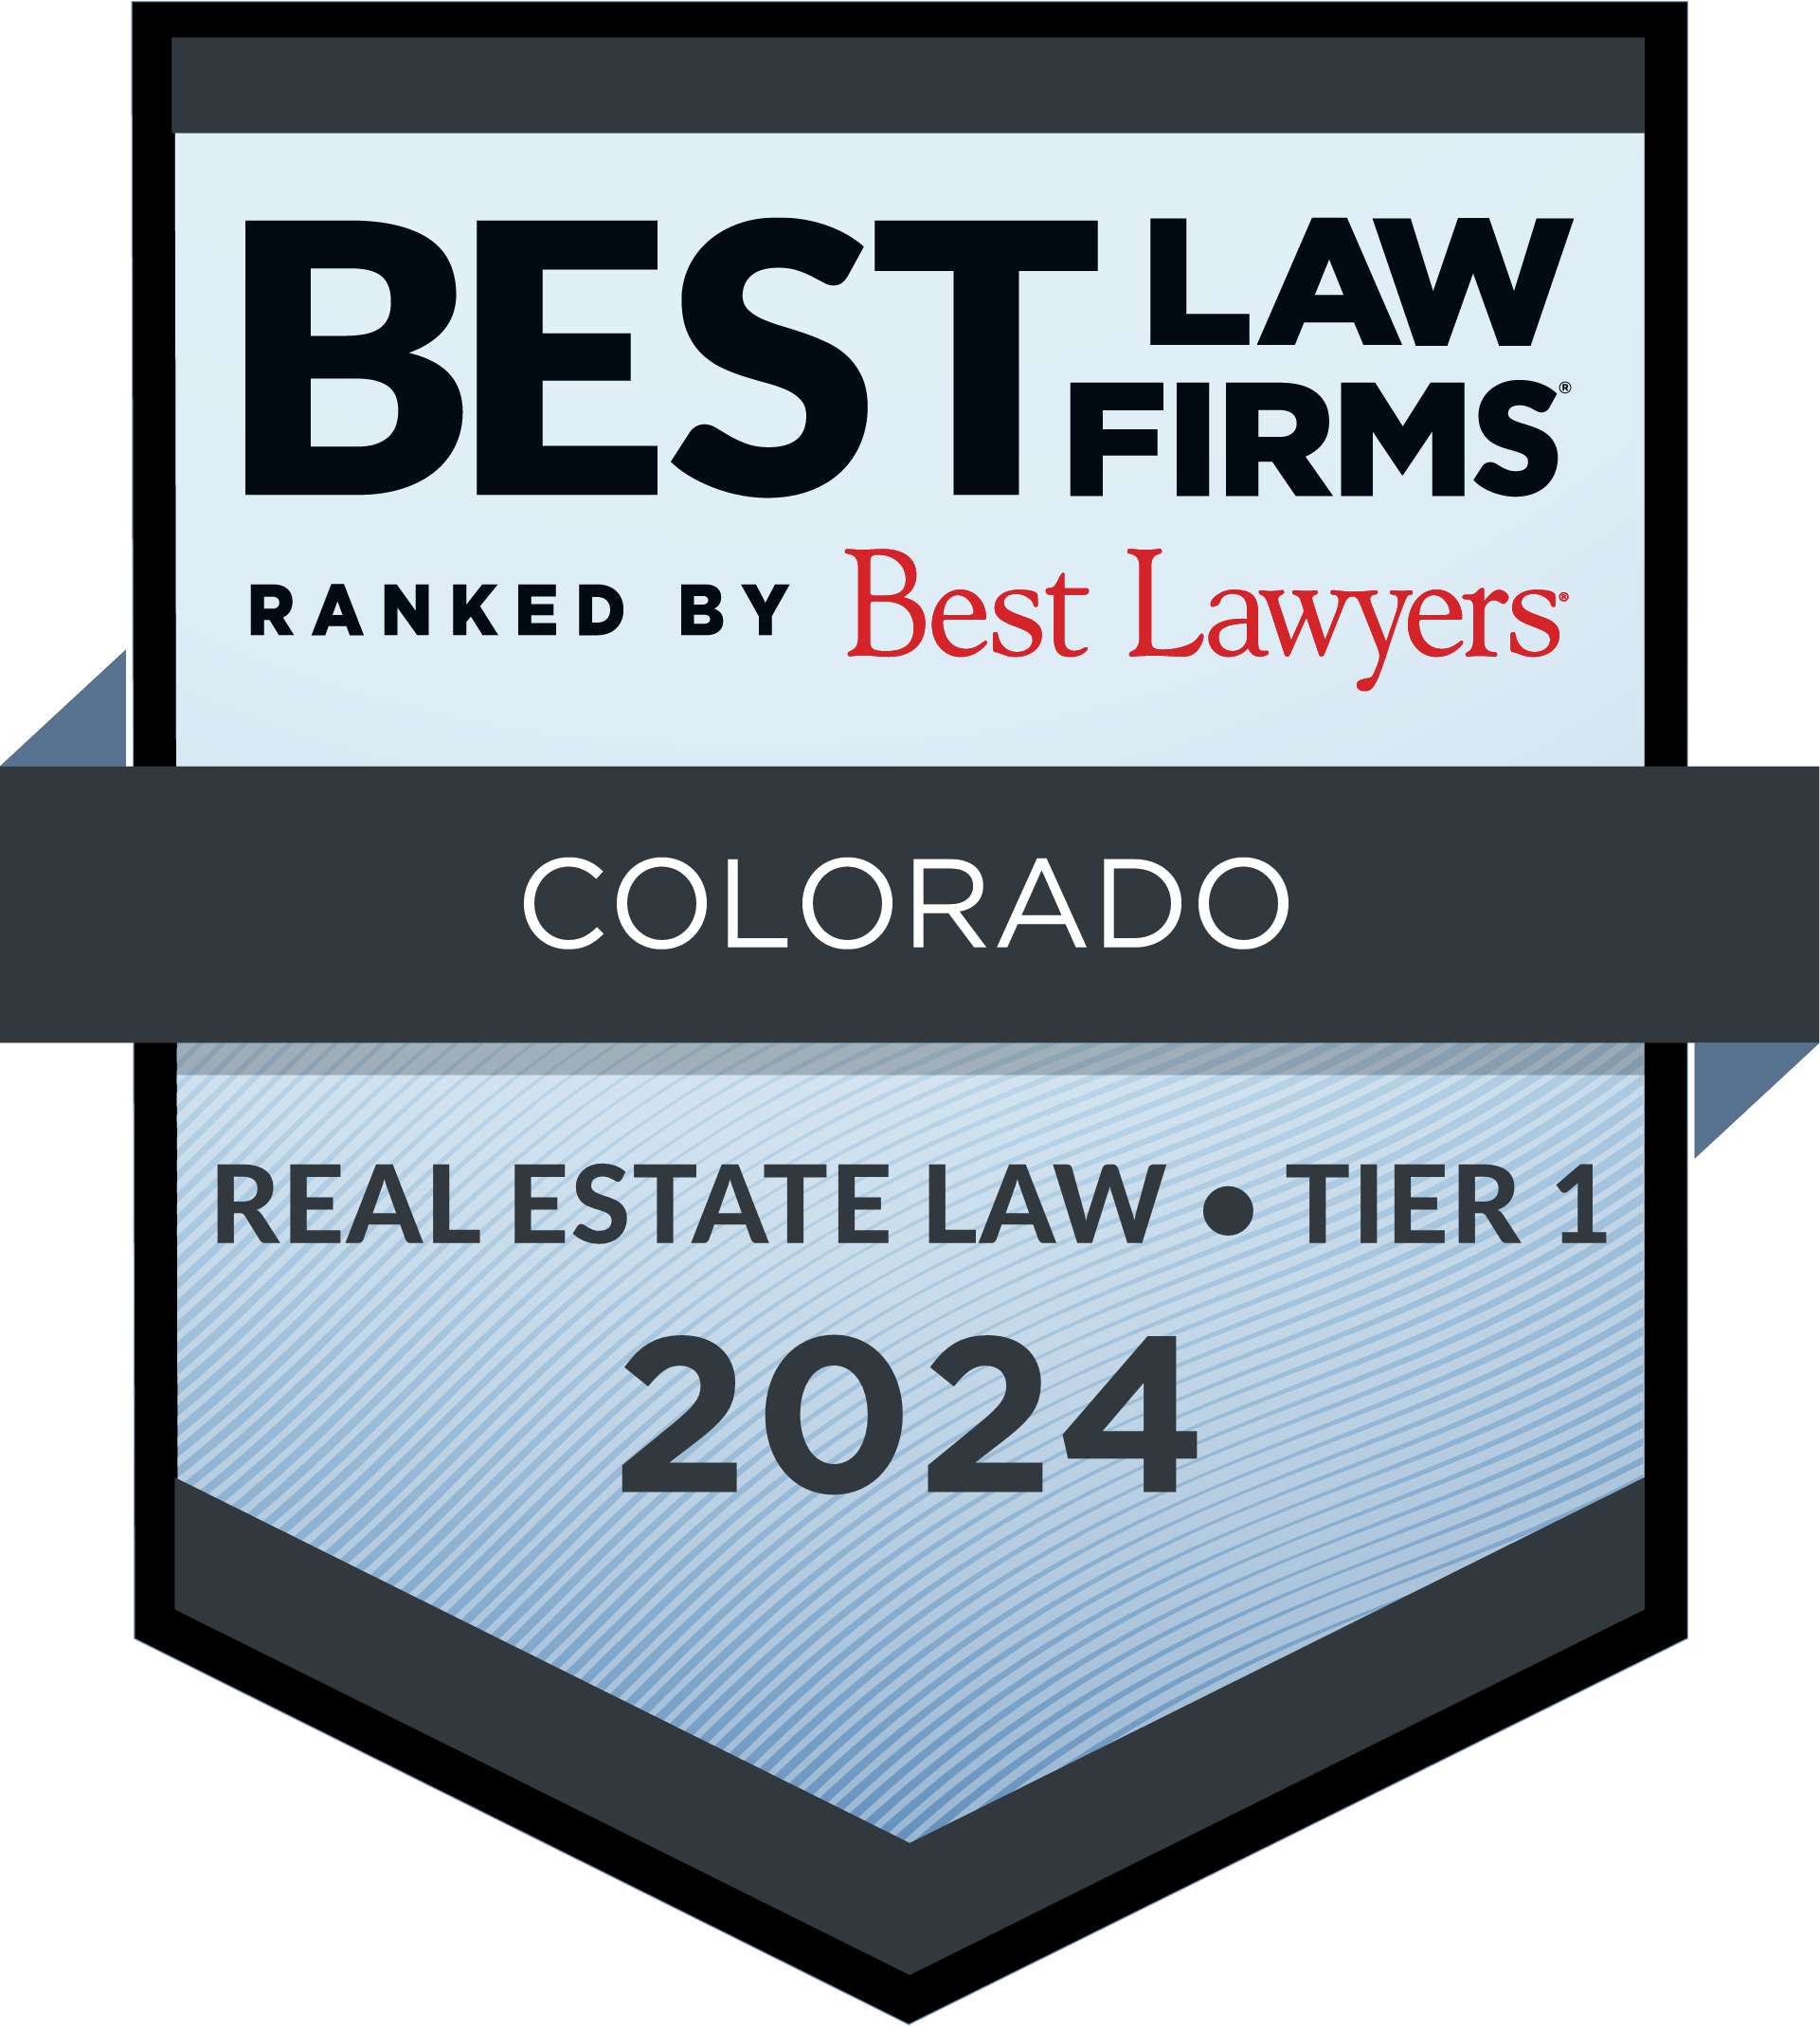 Best Lawyers | Best Law Firms | Rankend By Best Lawyers Colorado Real Estate Law Tirer 1 2024